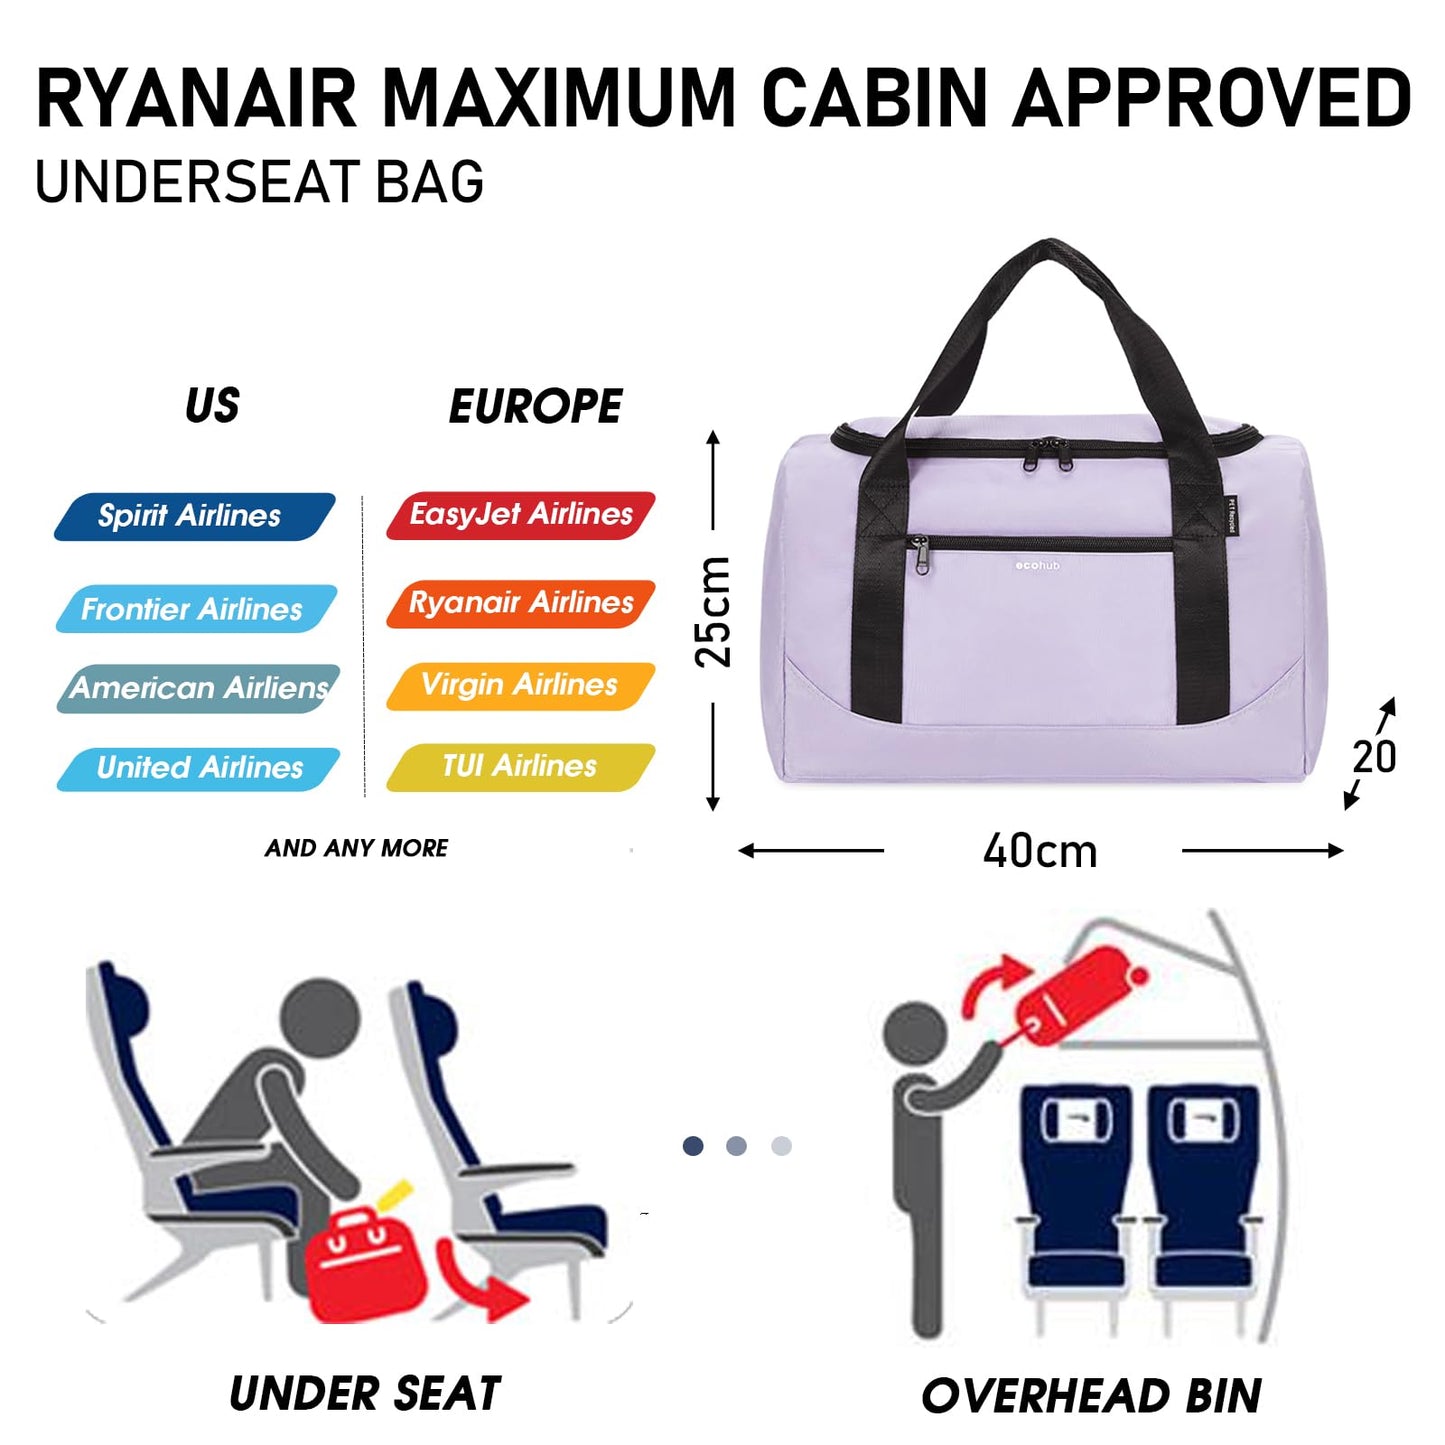 ECOHUB Ryanair Cabin Bags 40x20x25 Underseat Cabin Bag Travel Hand Luggage Bag Holdall Bag Carry on Bag Overnight for Women and Men Weekend Bag Hospital Bag Recycled PET Eco Friendly (Light Purple),